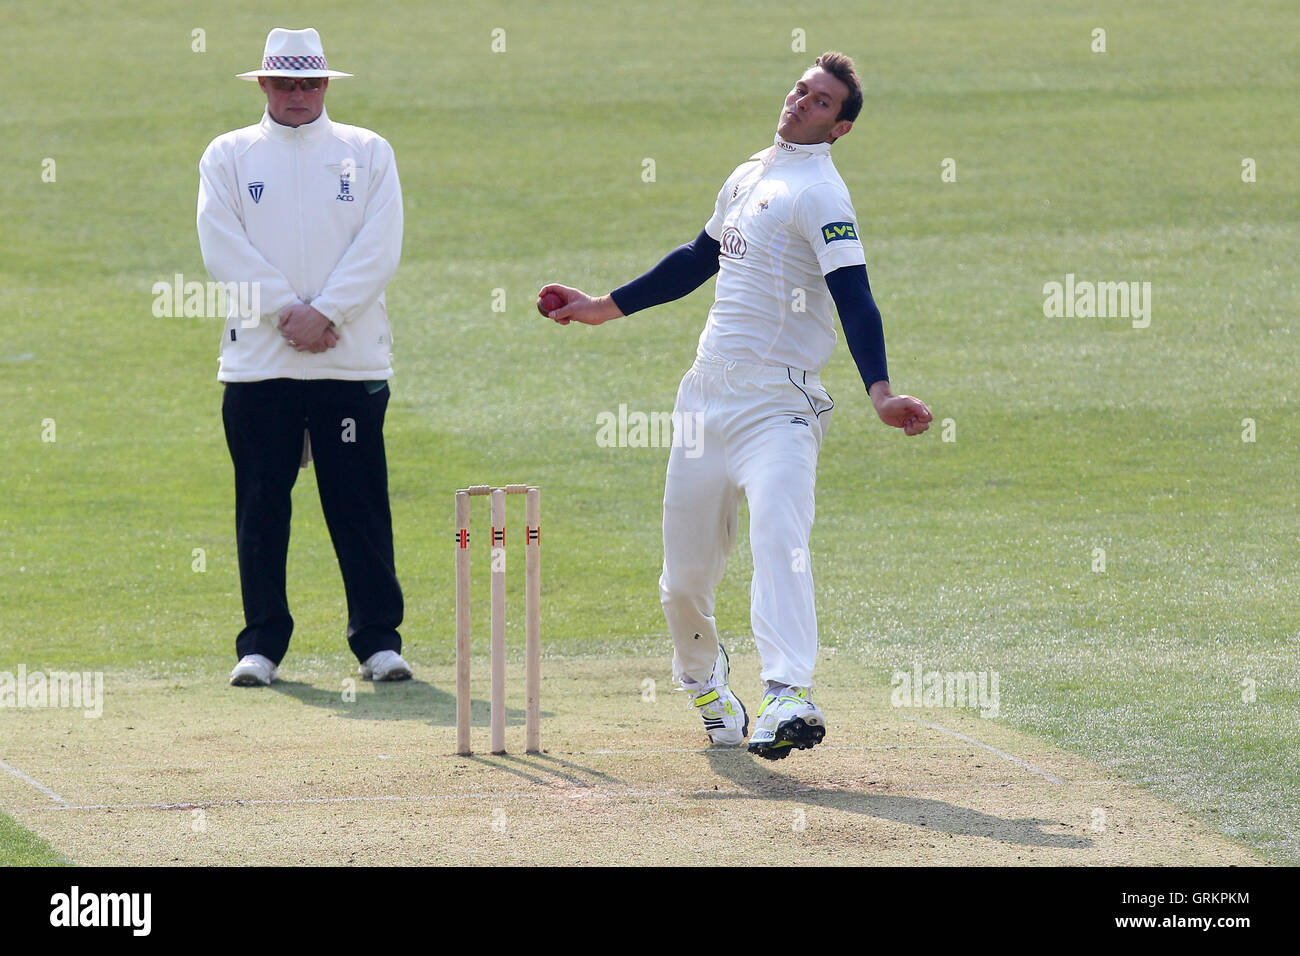 Chris Tremlett in bowling action for Surrey - Essex CCC vs Surrey CCC - Pre-Season Friendly Cricket Match at the Essex County Ground, Chelmsford - 27/03/14 Stock Photo